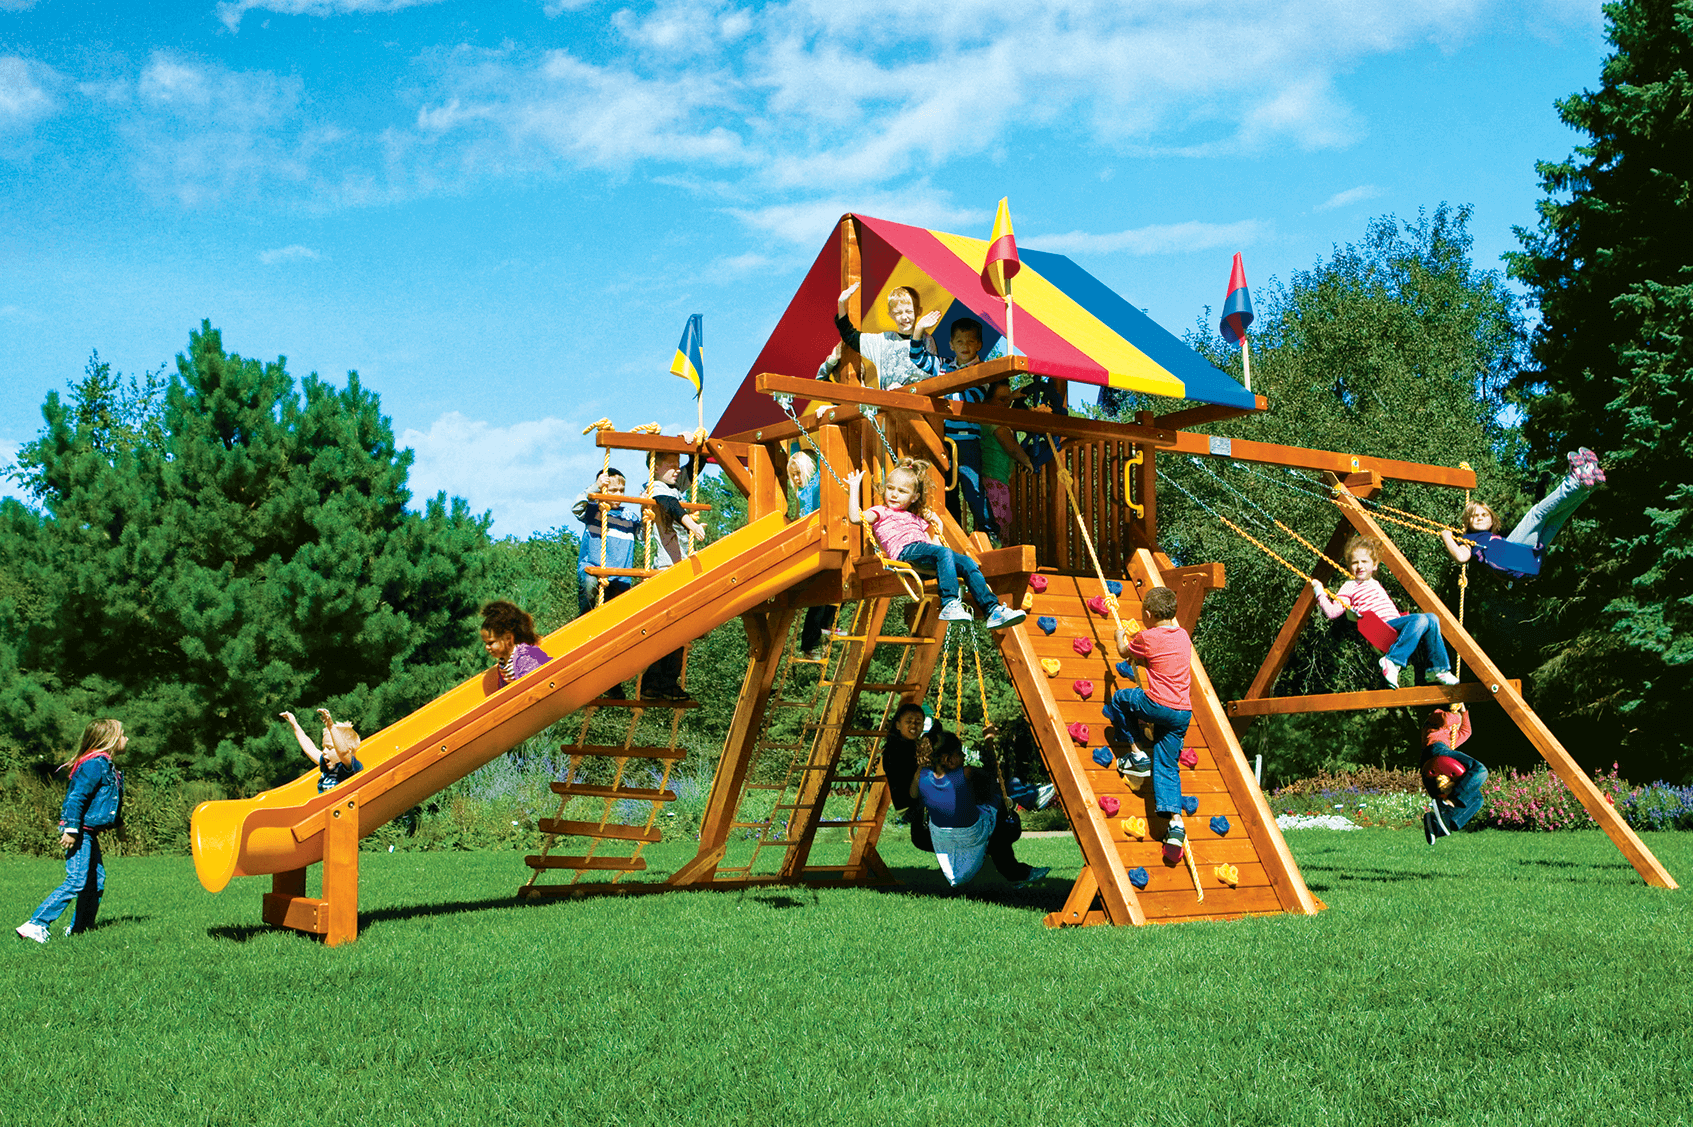 Monster Castle Pkg II Feature Model (24A) - Rainbow Play Systems of Texas